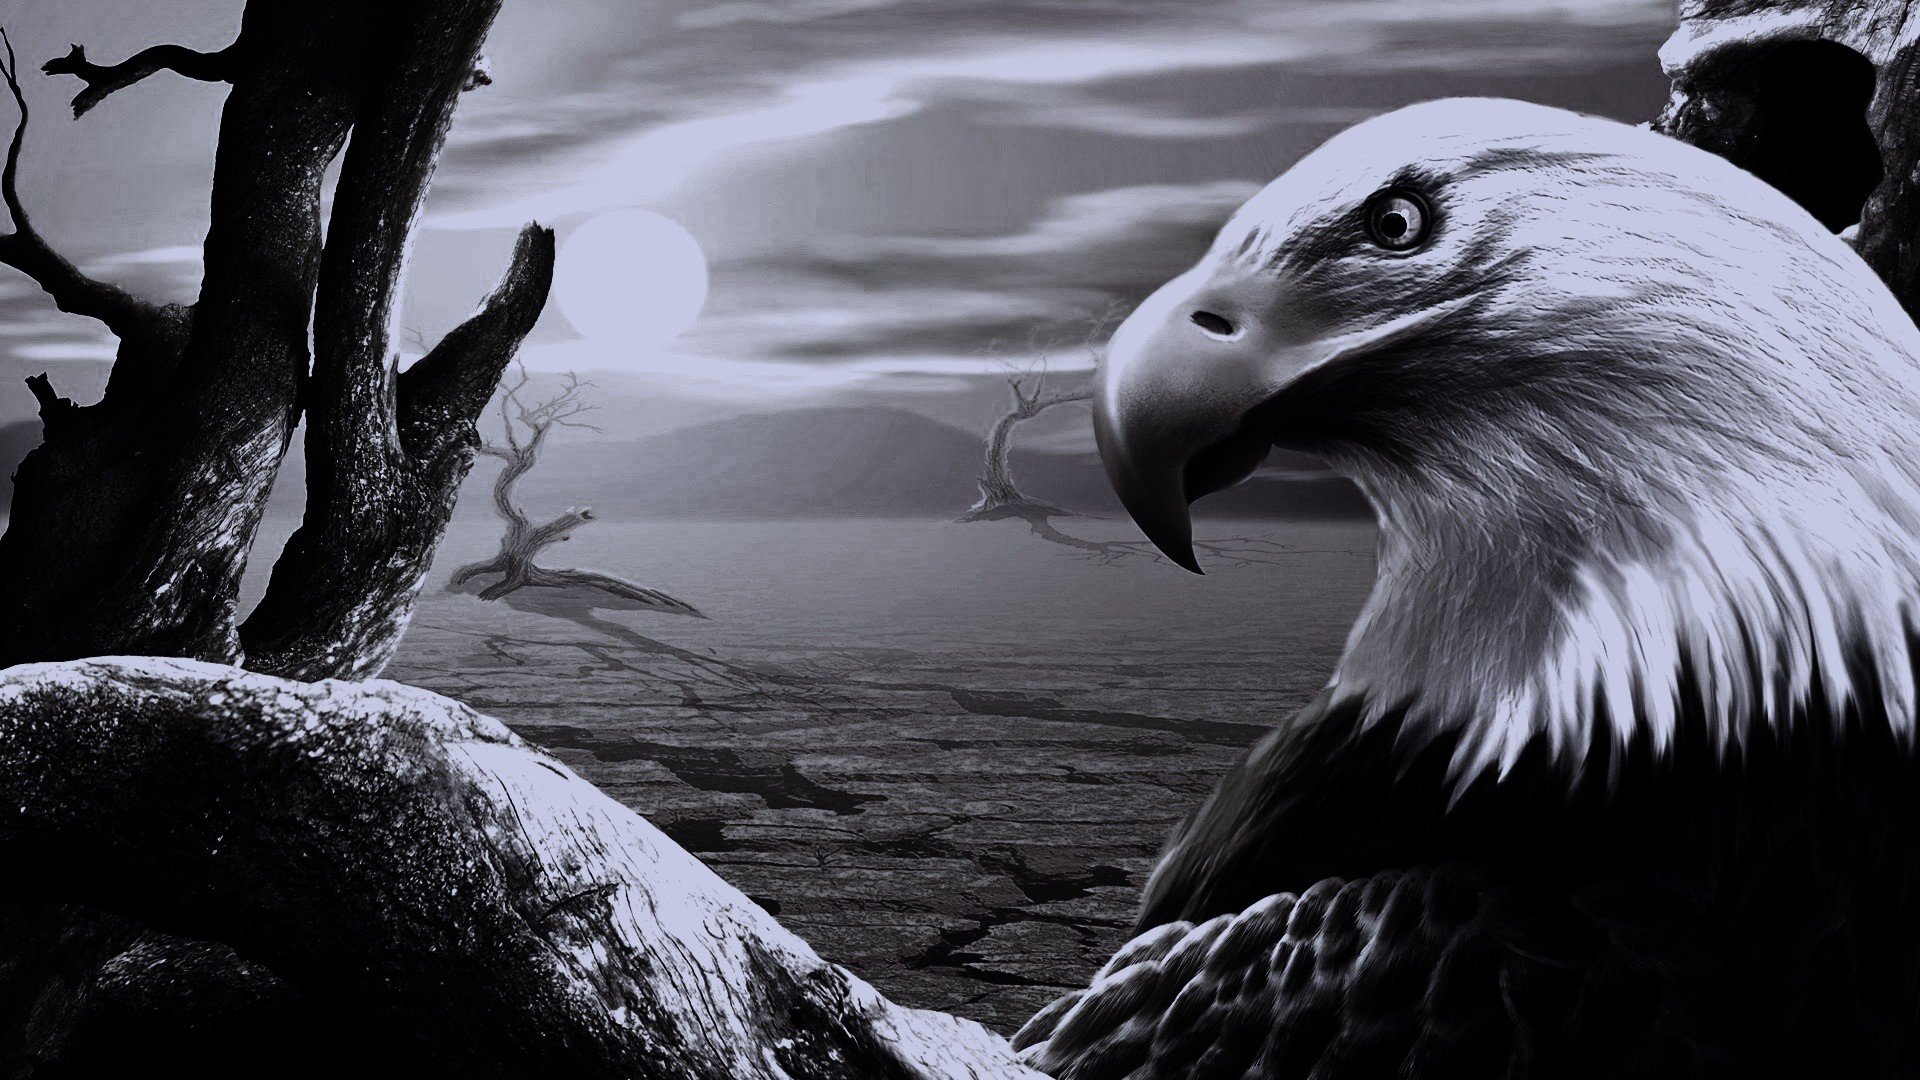 Black eagle Wallpapers Download | MobCup